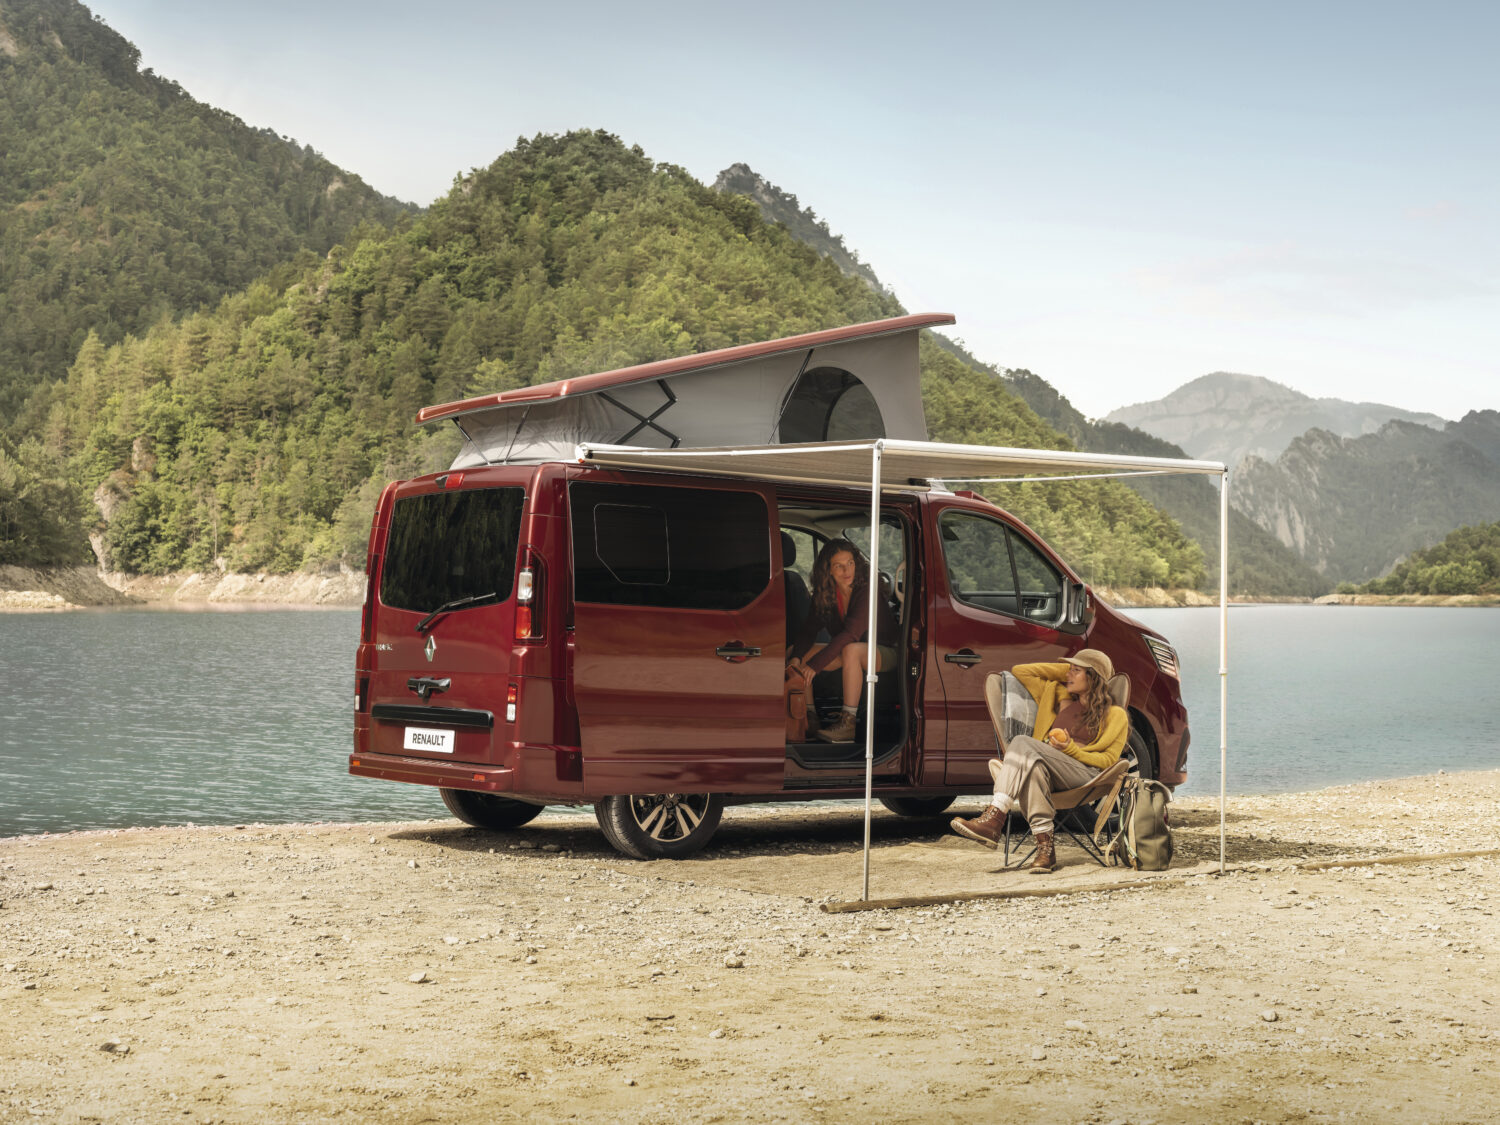 2022 - Story - All-new Renault Trafic SpaceNomad: your place in the sun